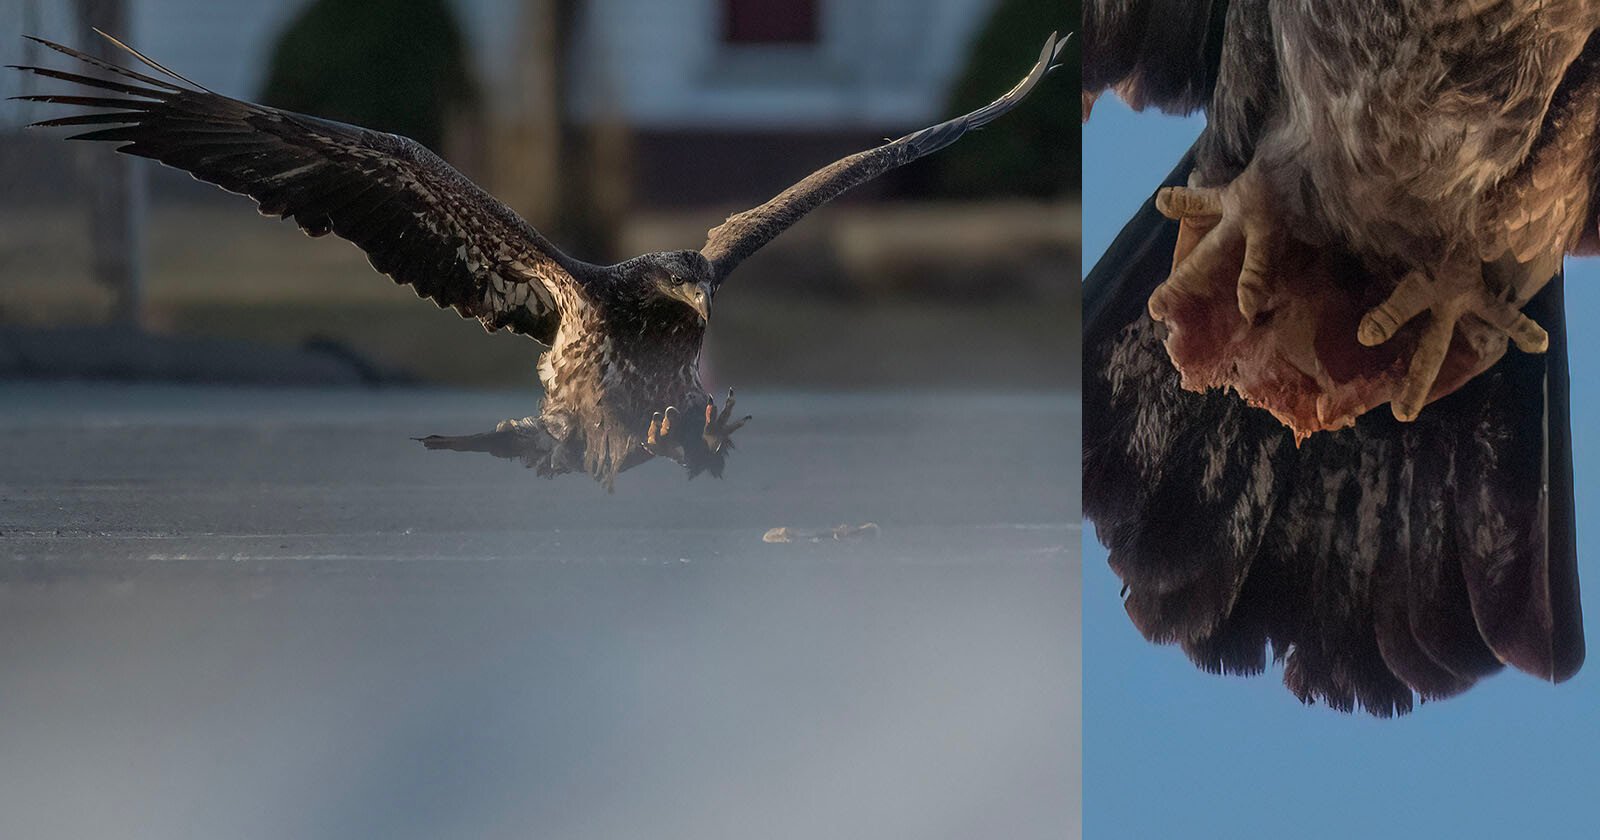  photographer captures eagle flying off pepperoni pizza 